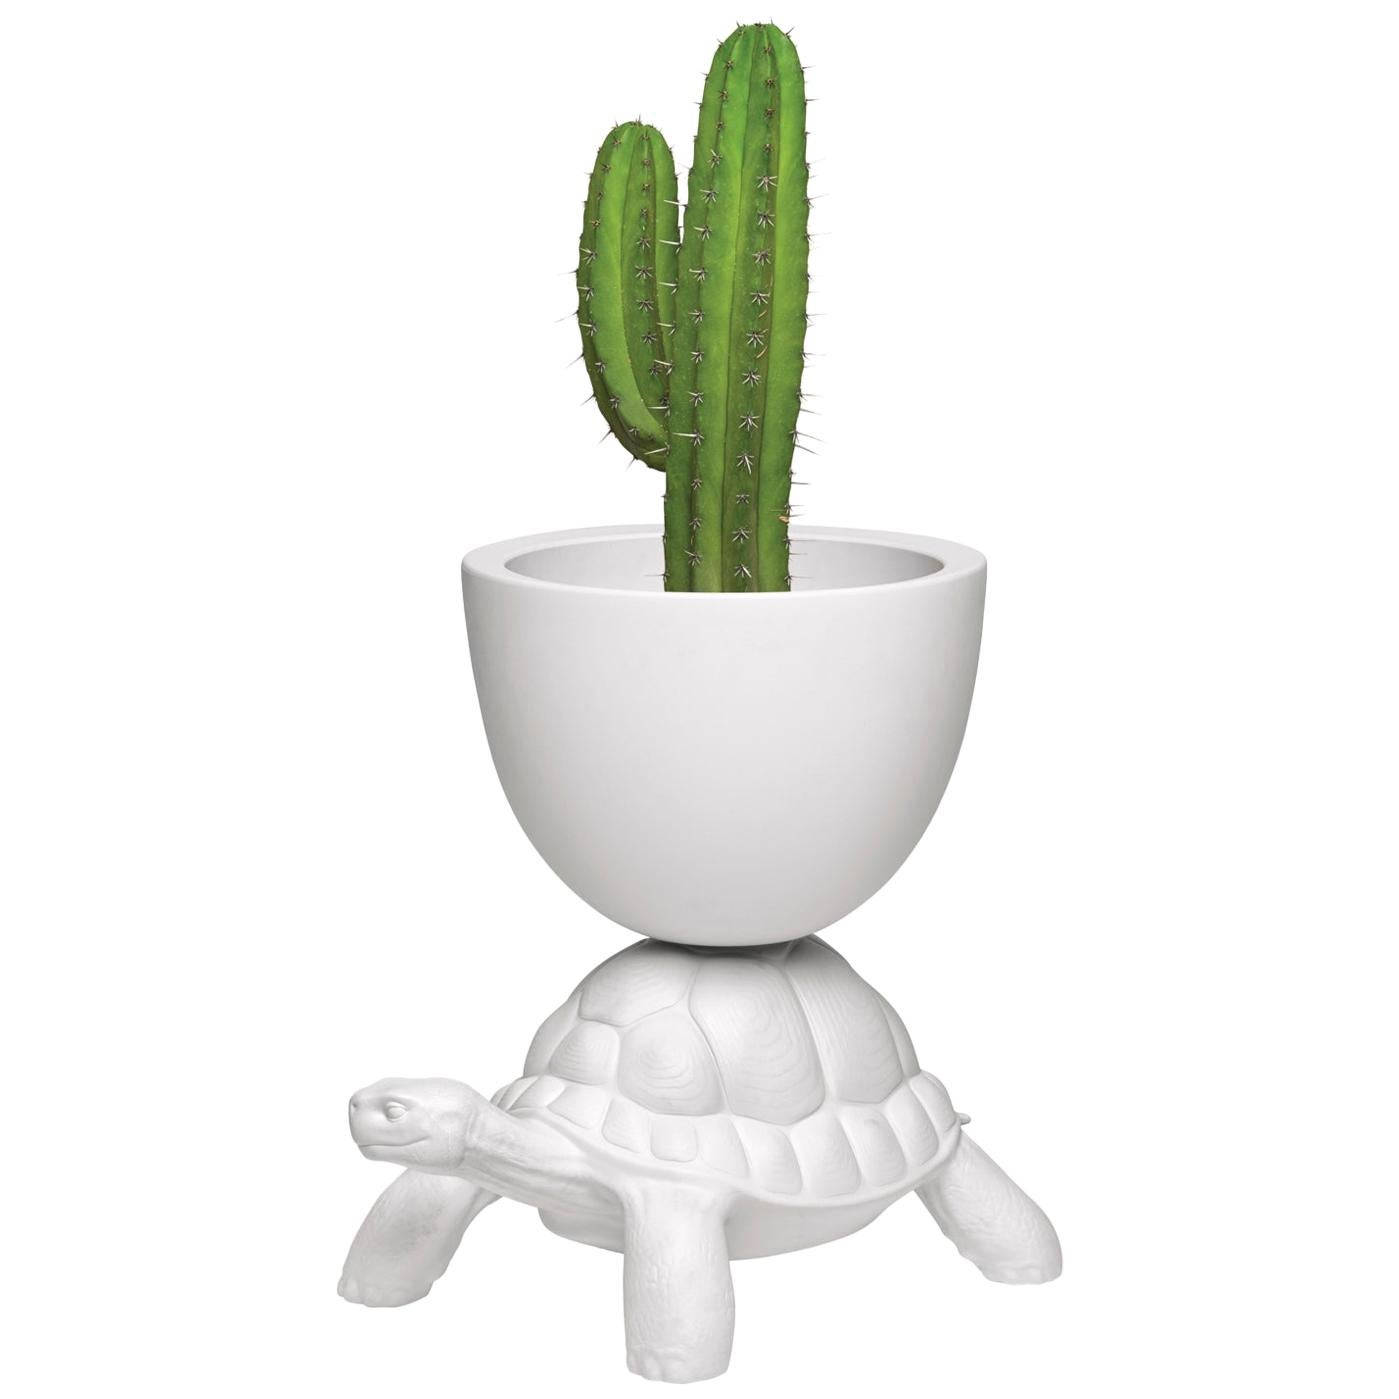 In Stock in Los Angeles, White Turtle Carry Planter / Champagne Cooler